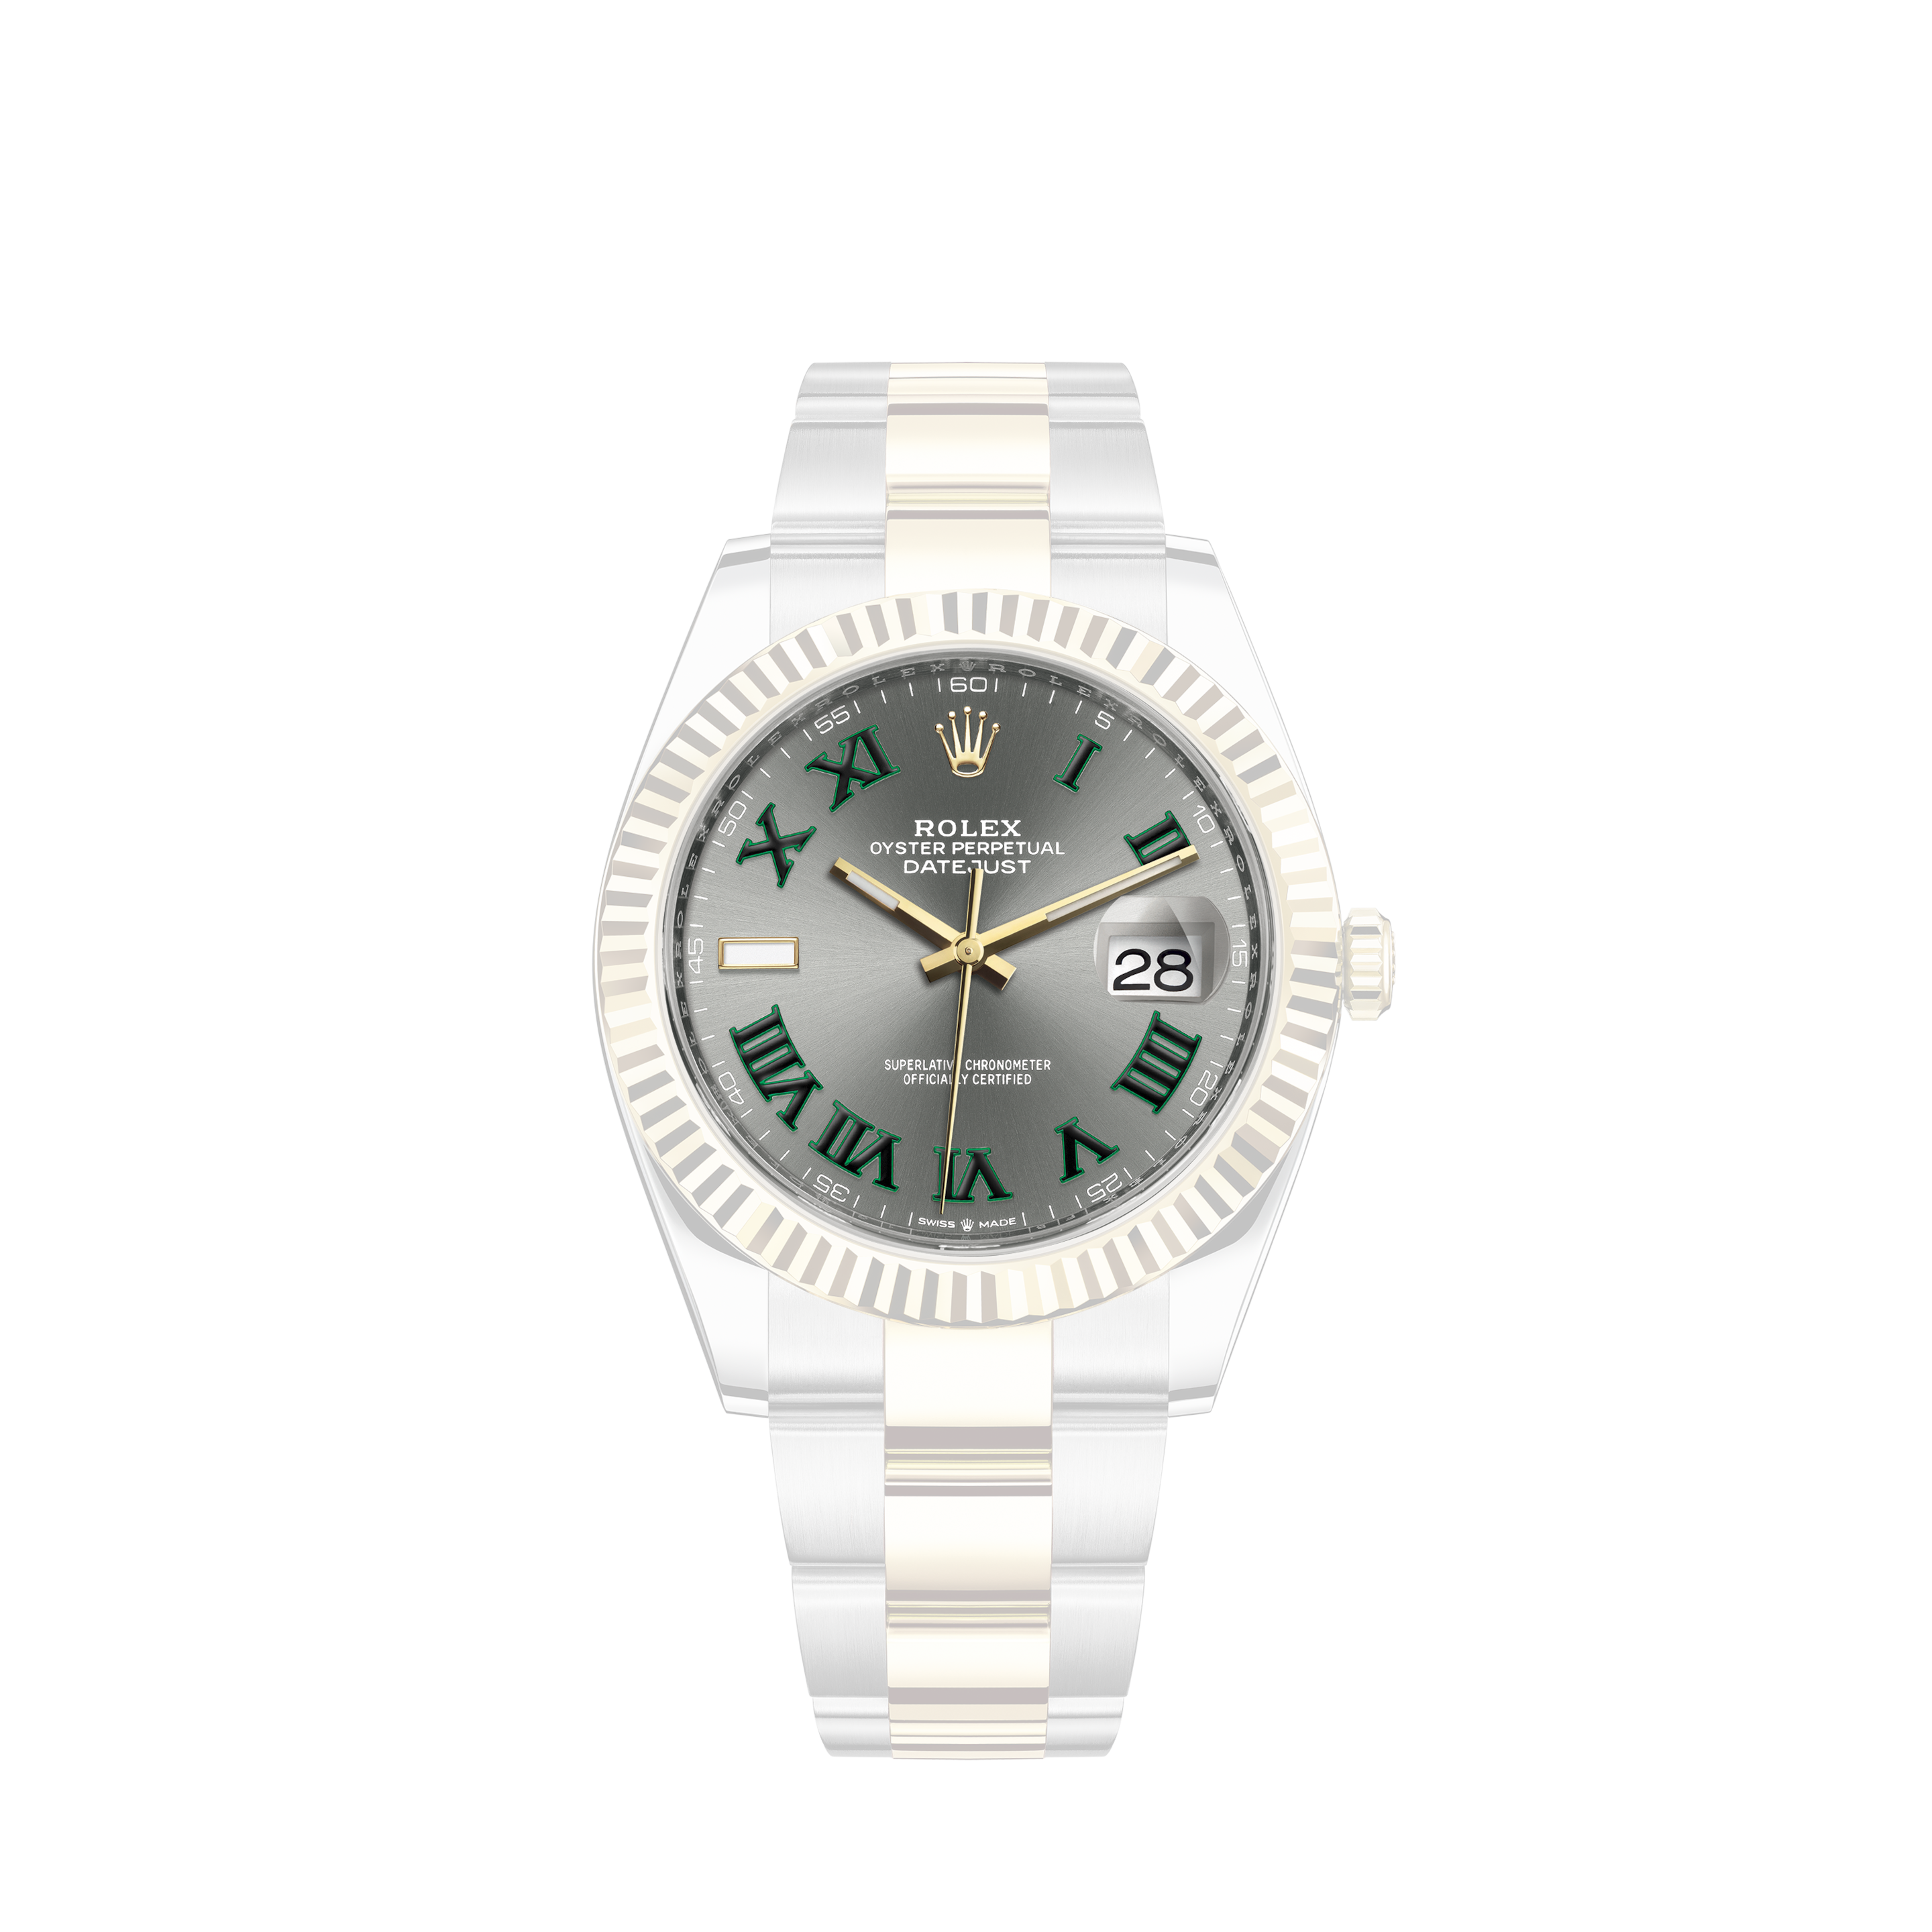 Rolex Explorer II 216570 N.O.C CAMOUFLAGE - Limited Edition /10